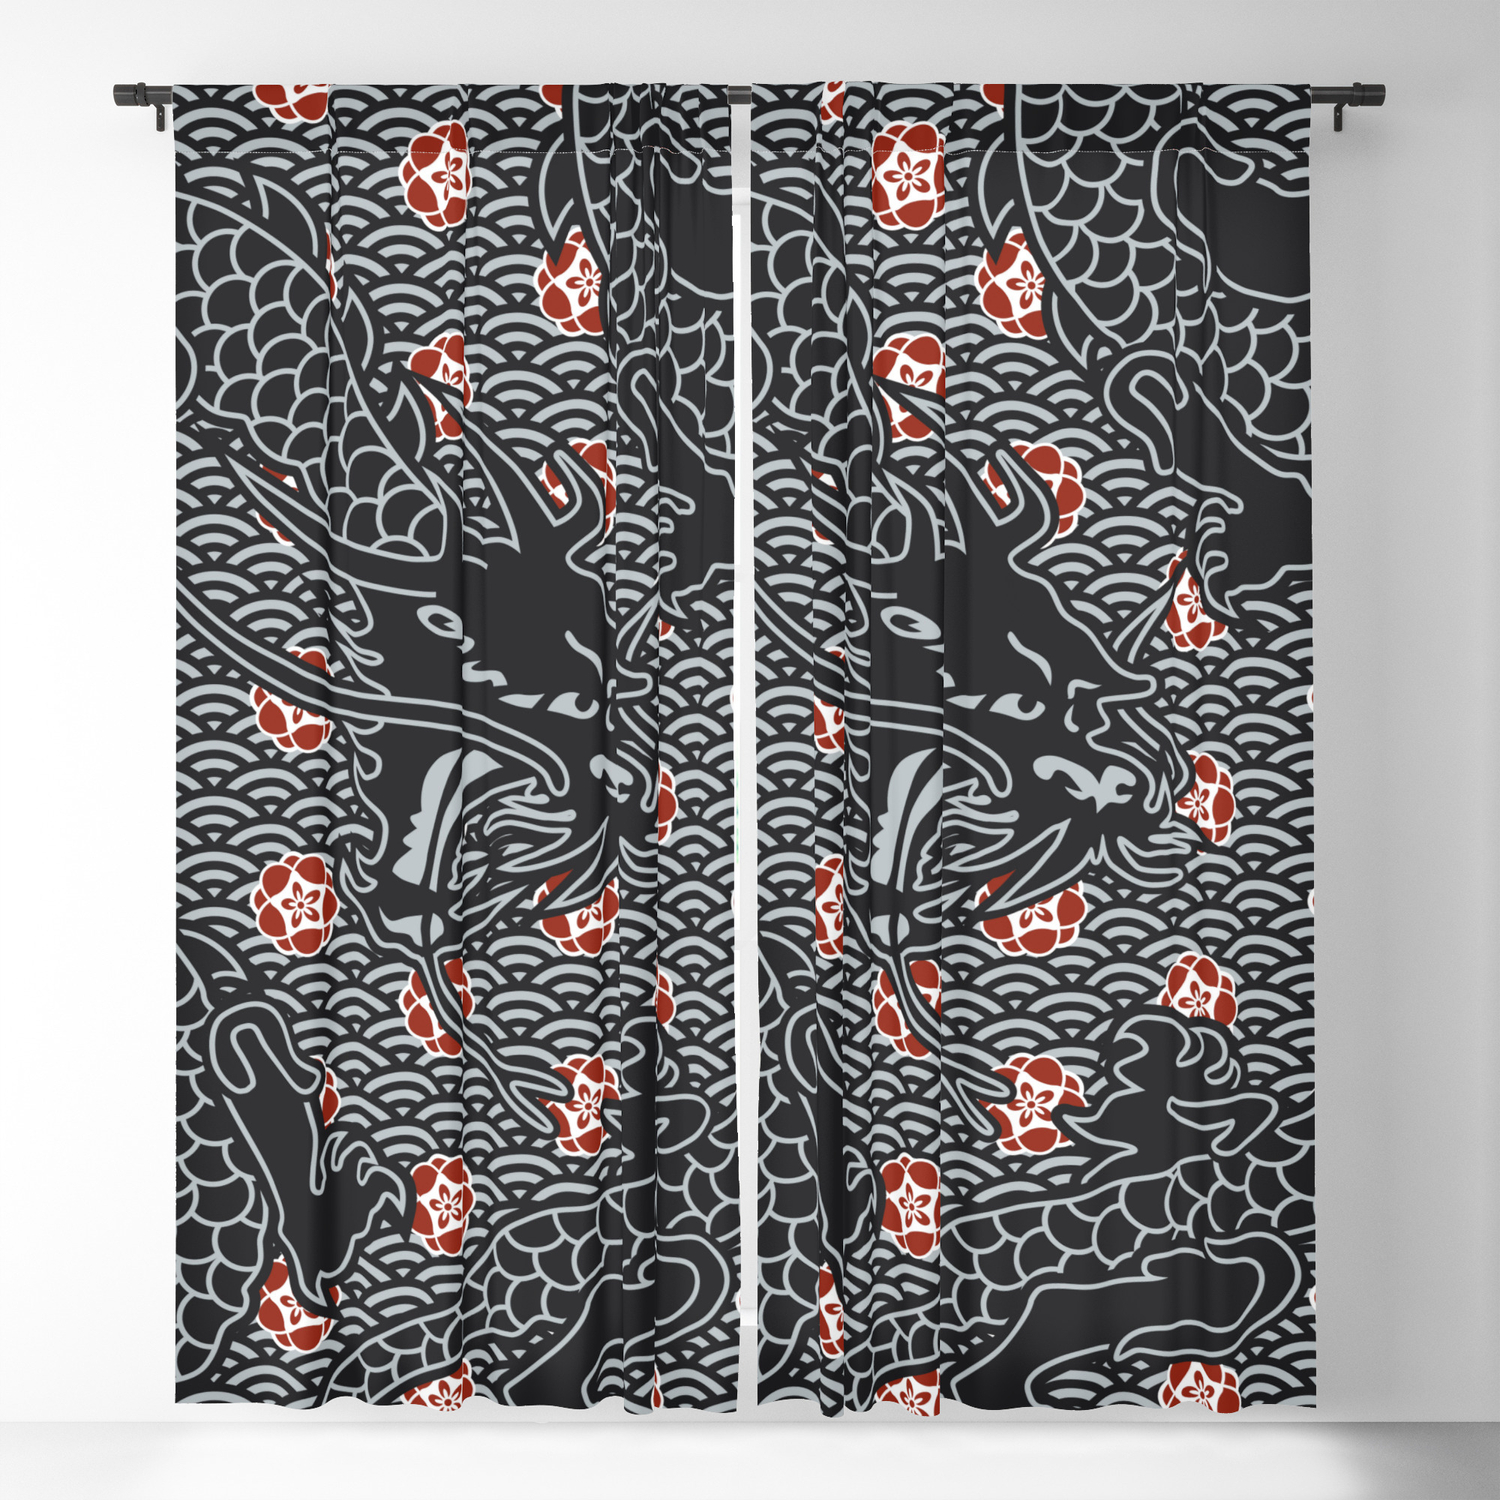 2 Panel Ancient Chinese Dragon Dakring Blockout Window Curtain Drapes Fabric 